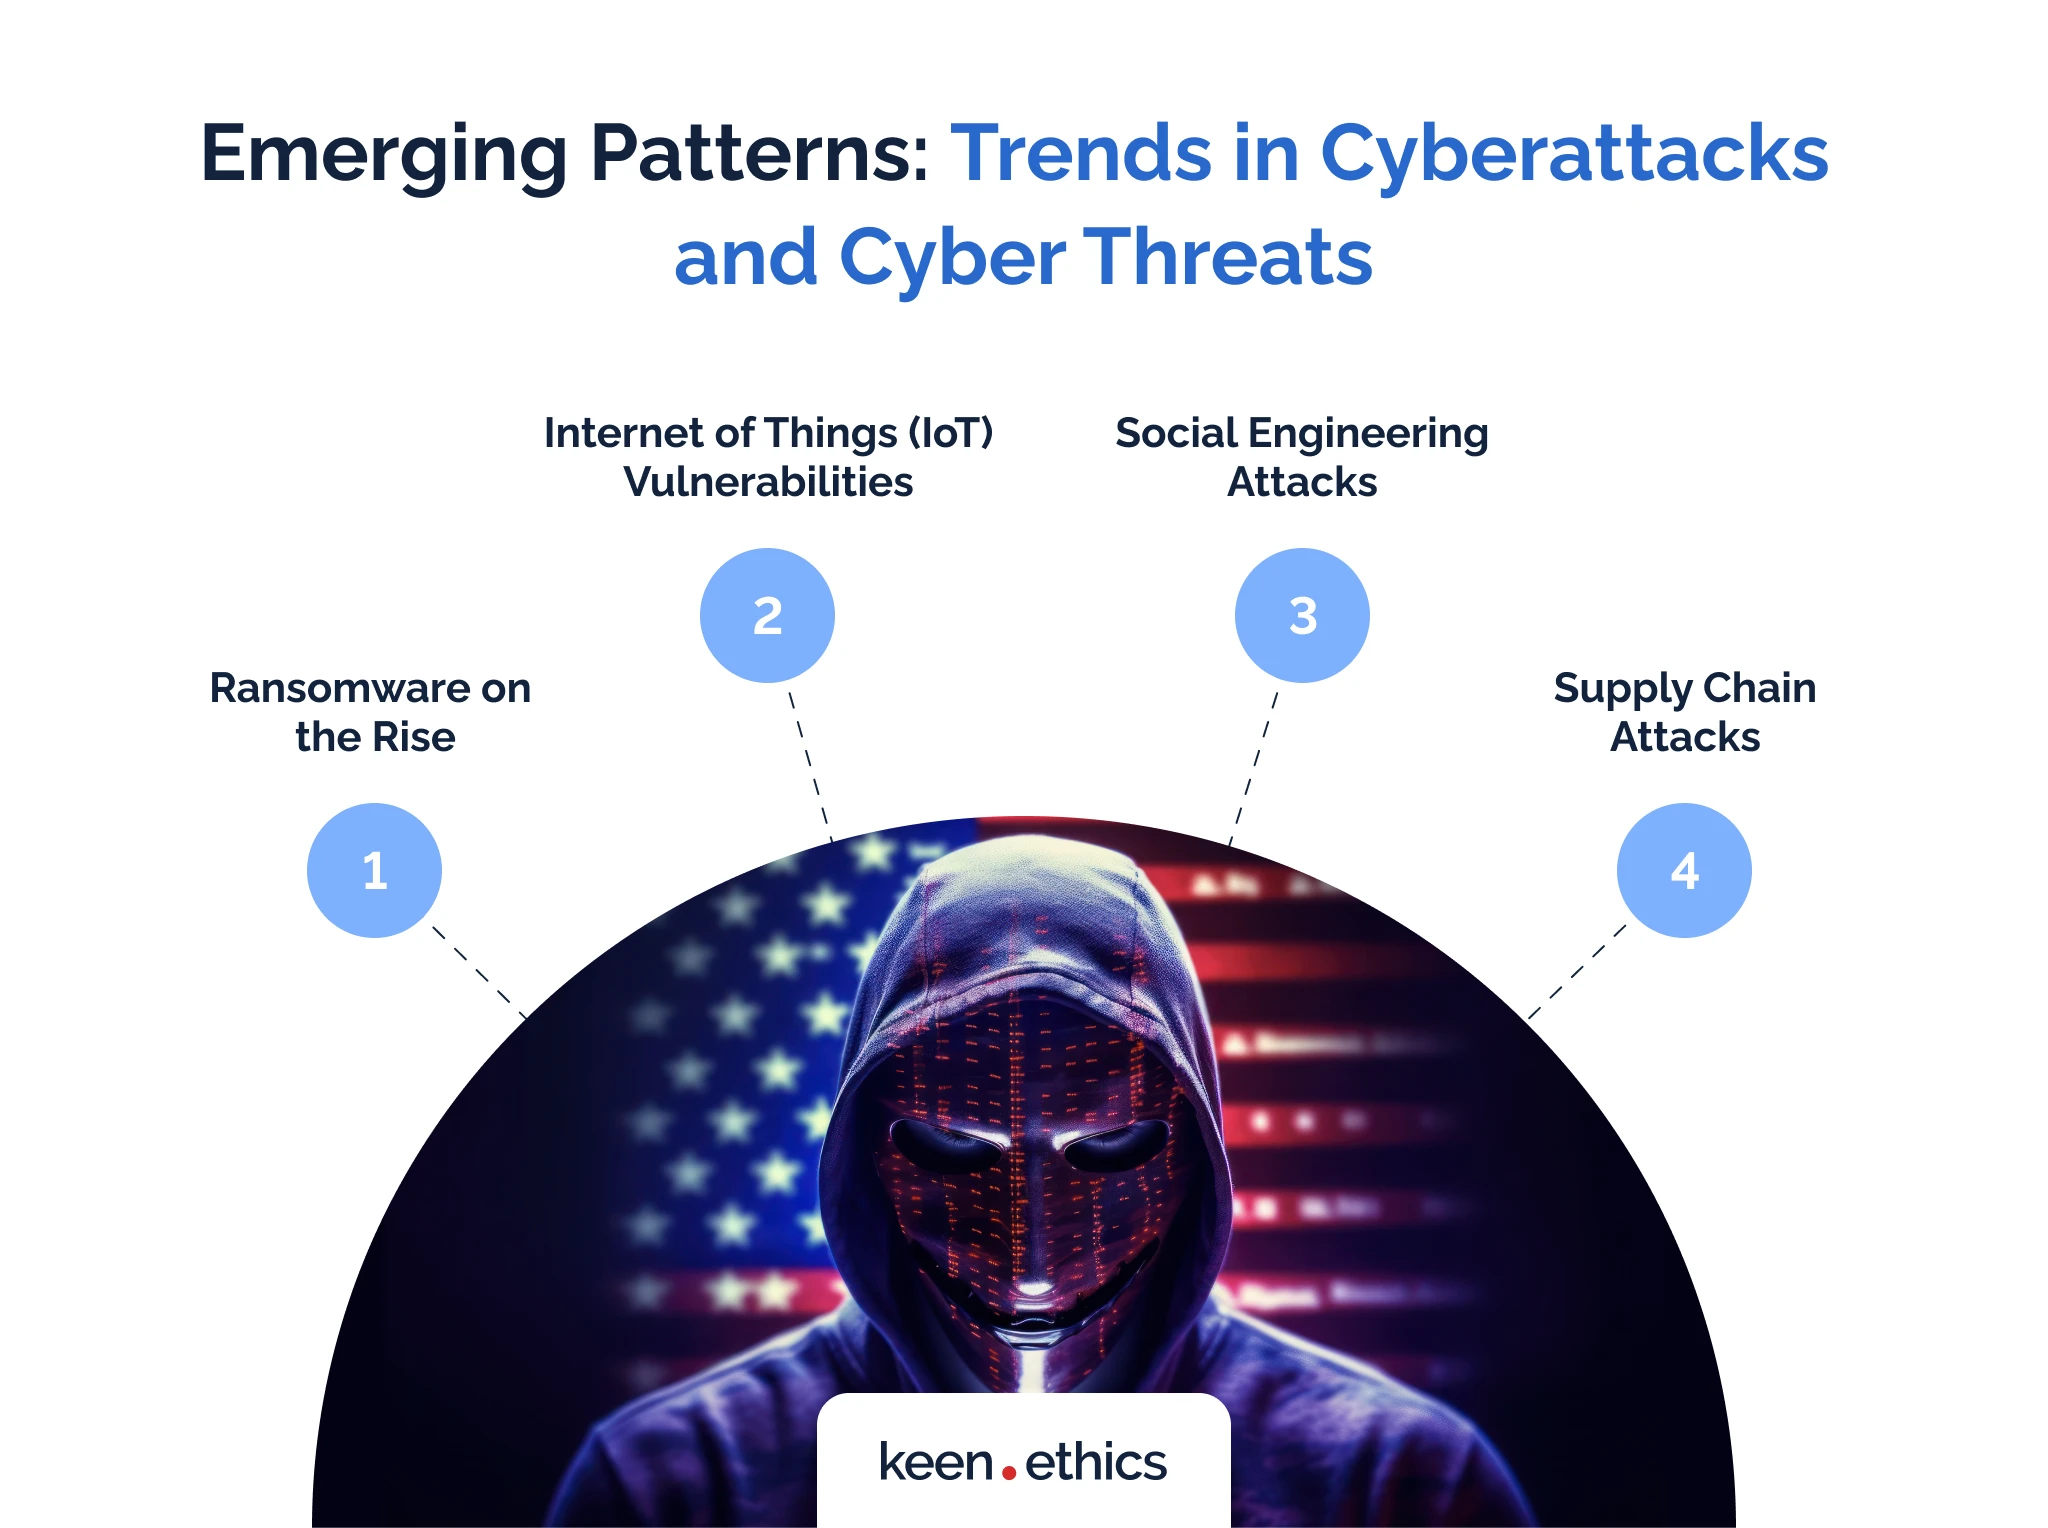 Emerging patterns: Trends in cyberattacks and cyber threats